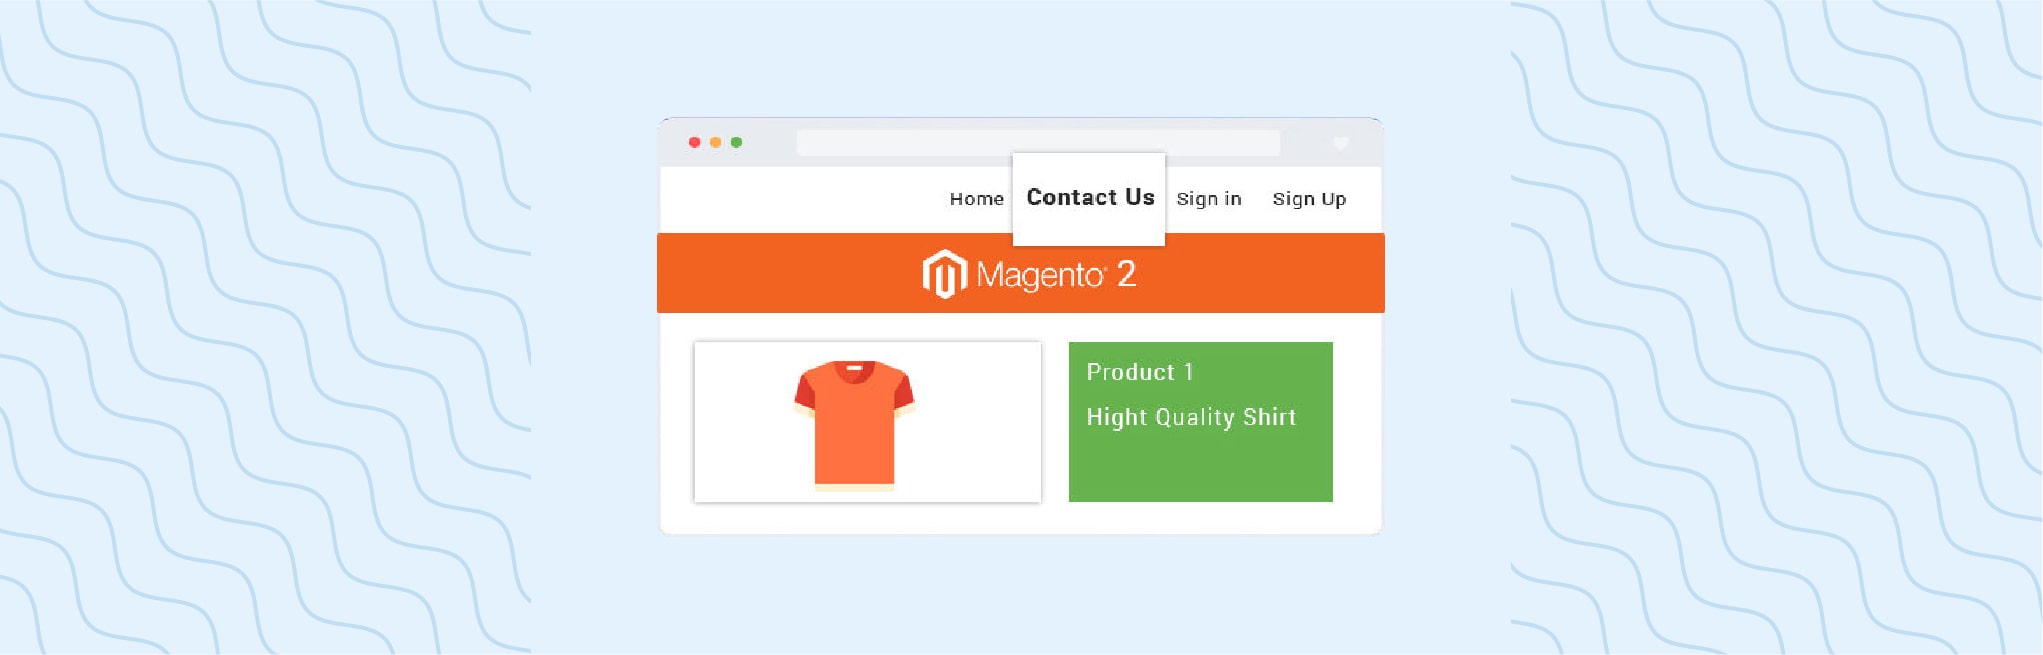 banner-How-to-add-a-link-in-the-top-menu-in-Magento-2